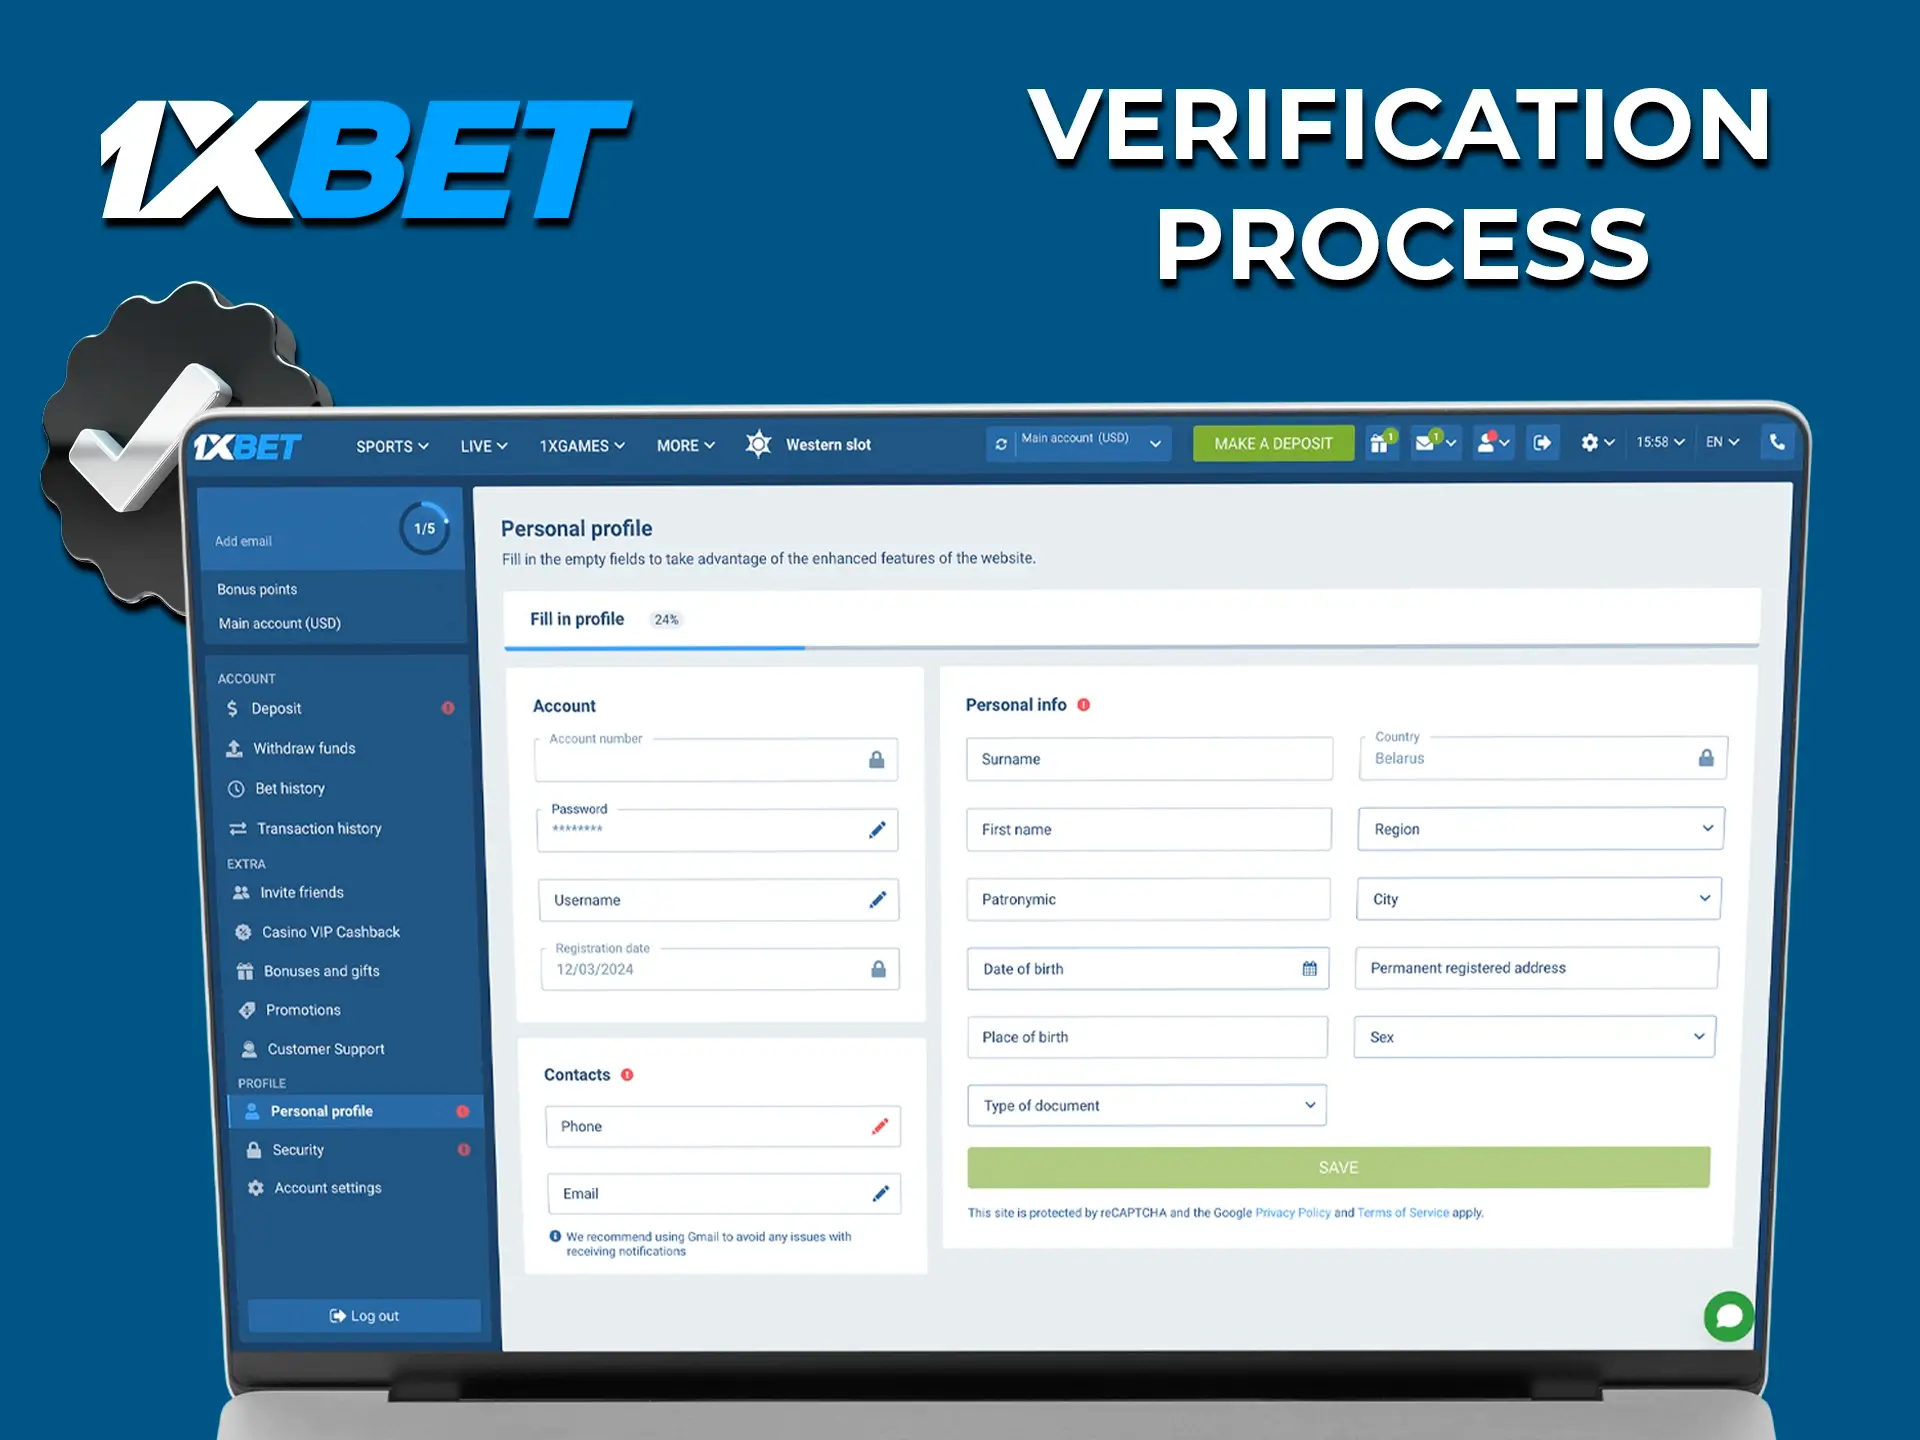 Be sure to verify your account to gain full access to 1xBet's features.